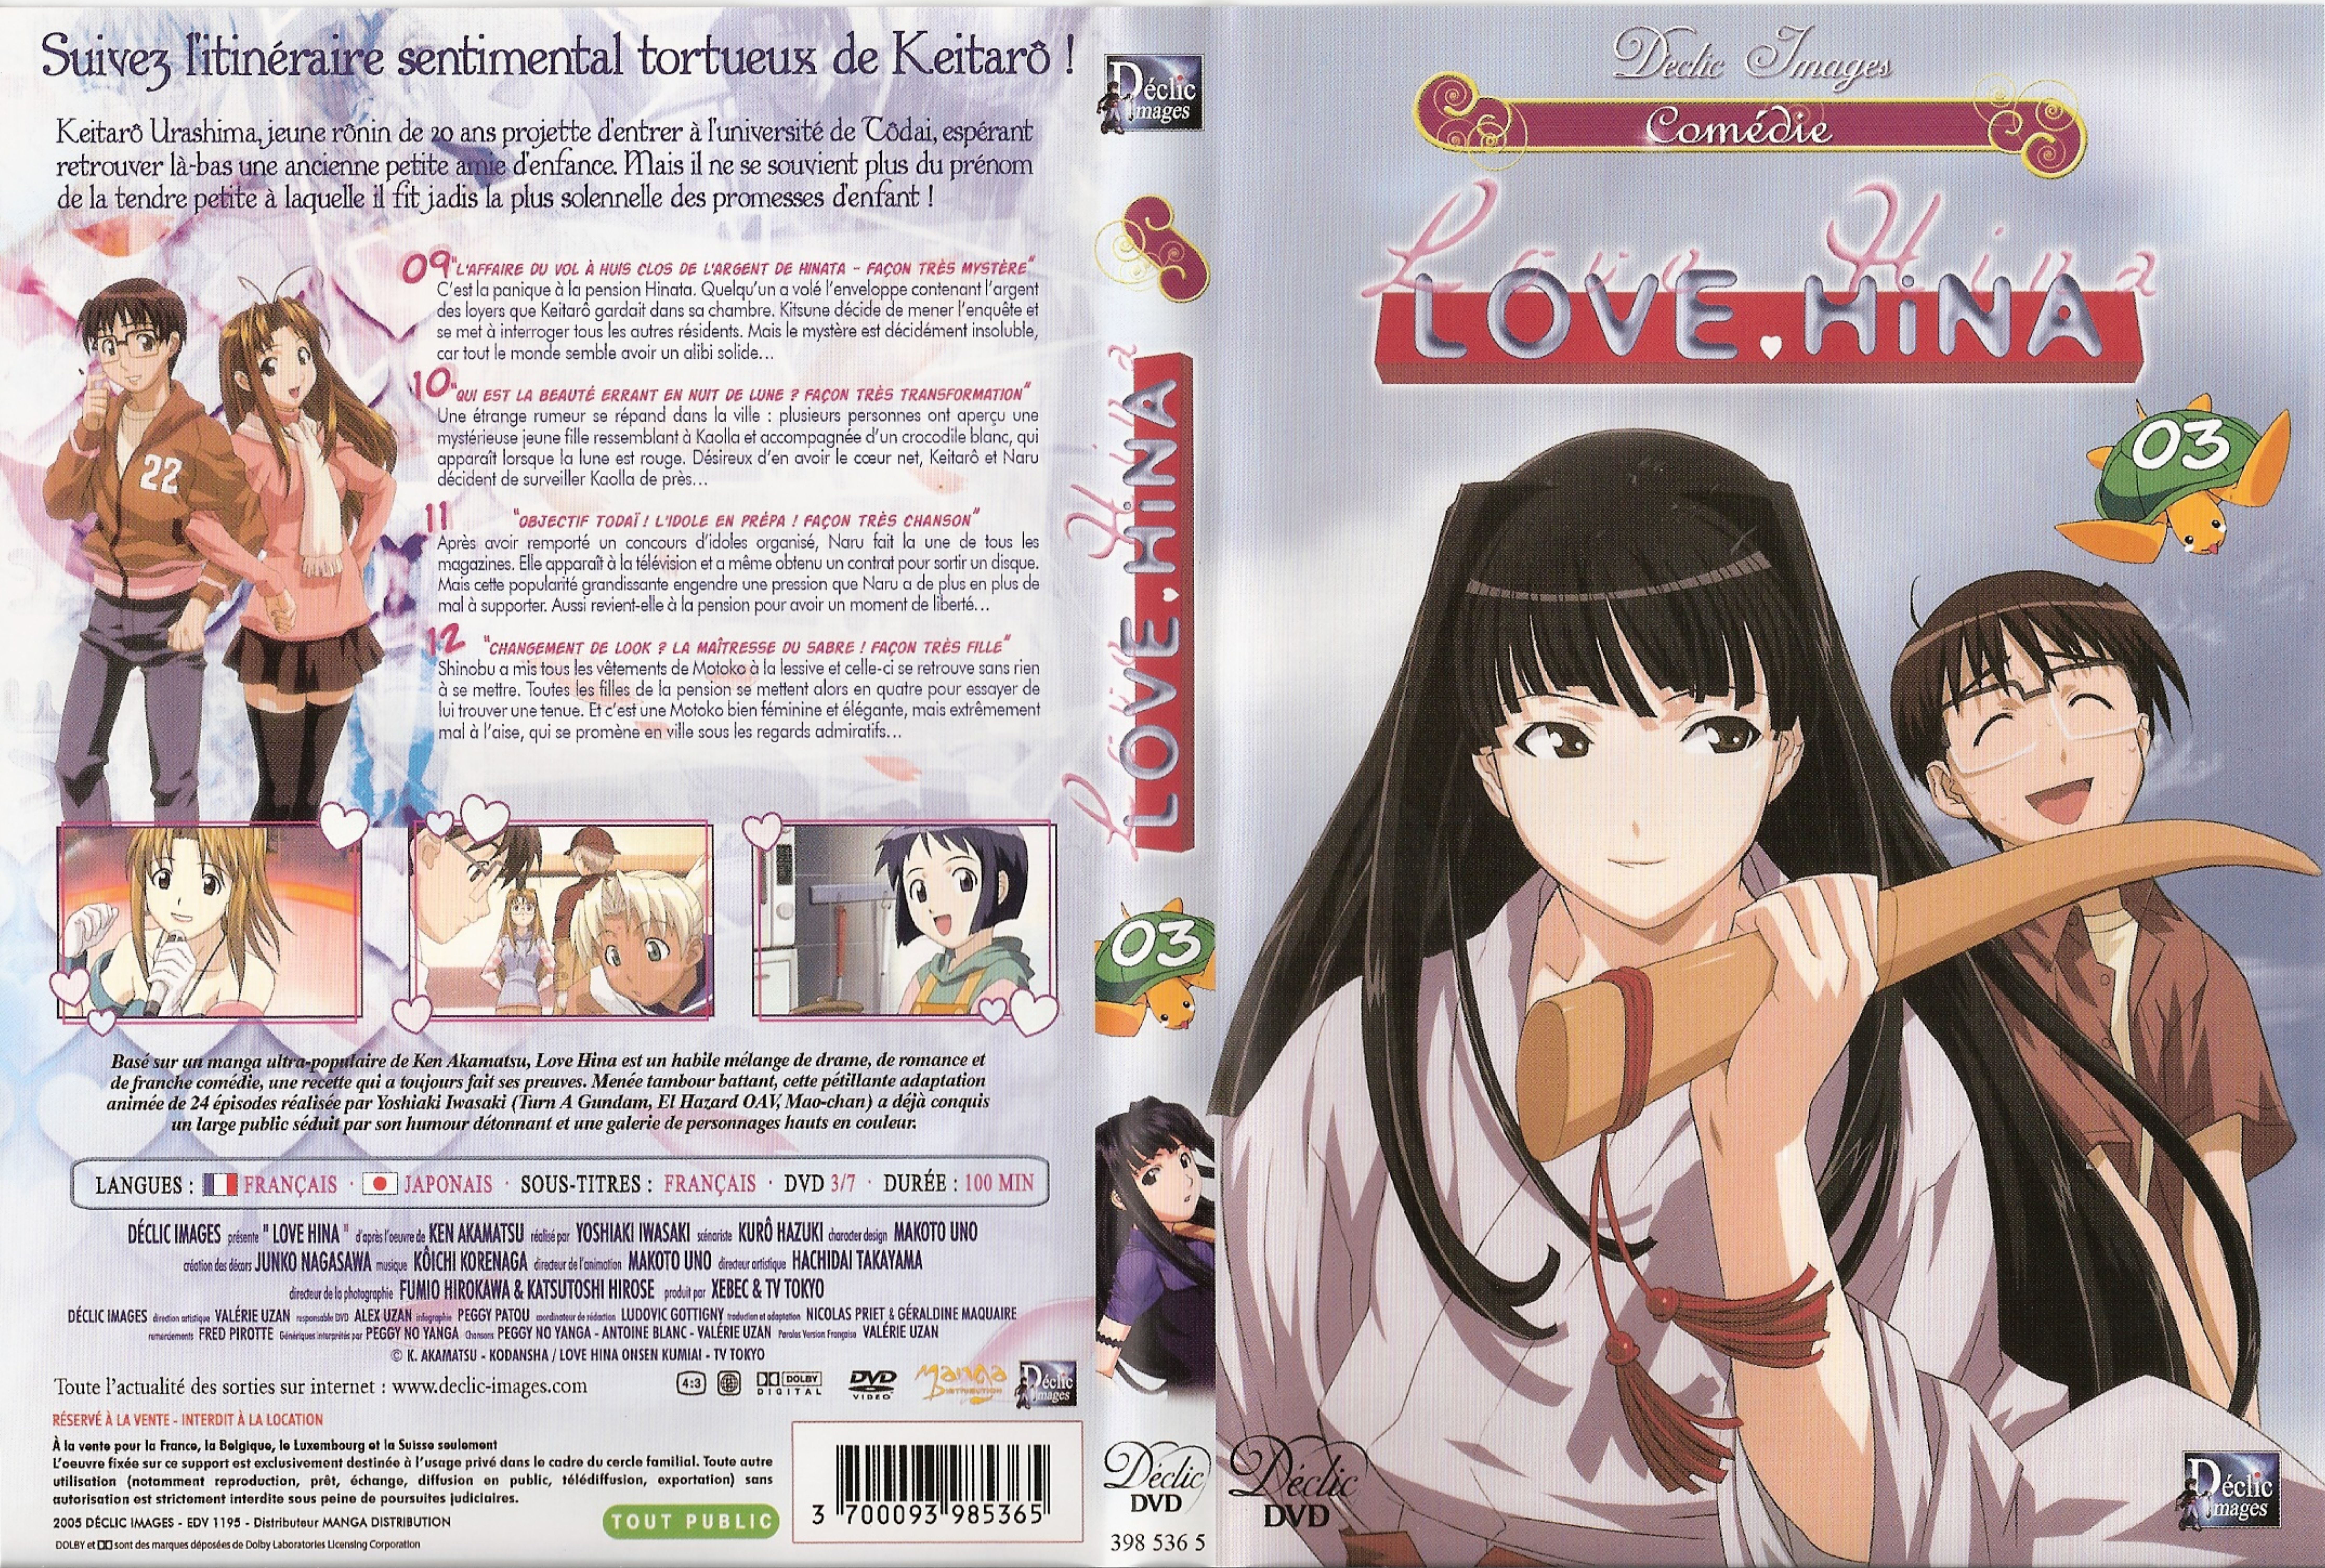 Jaquette DVD Love Hina DVD 03